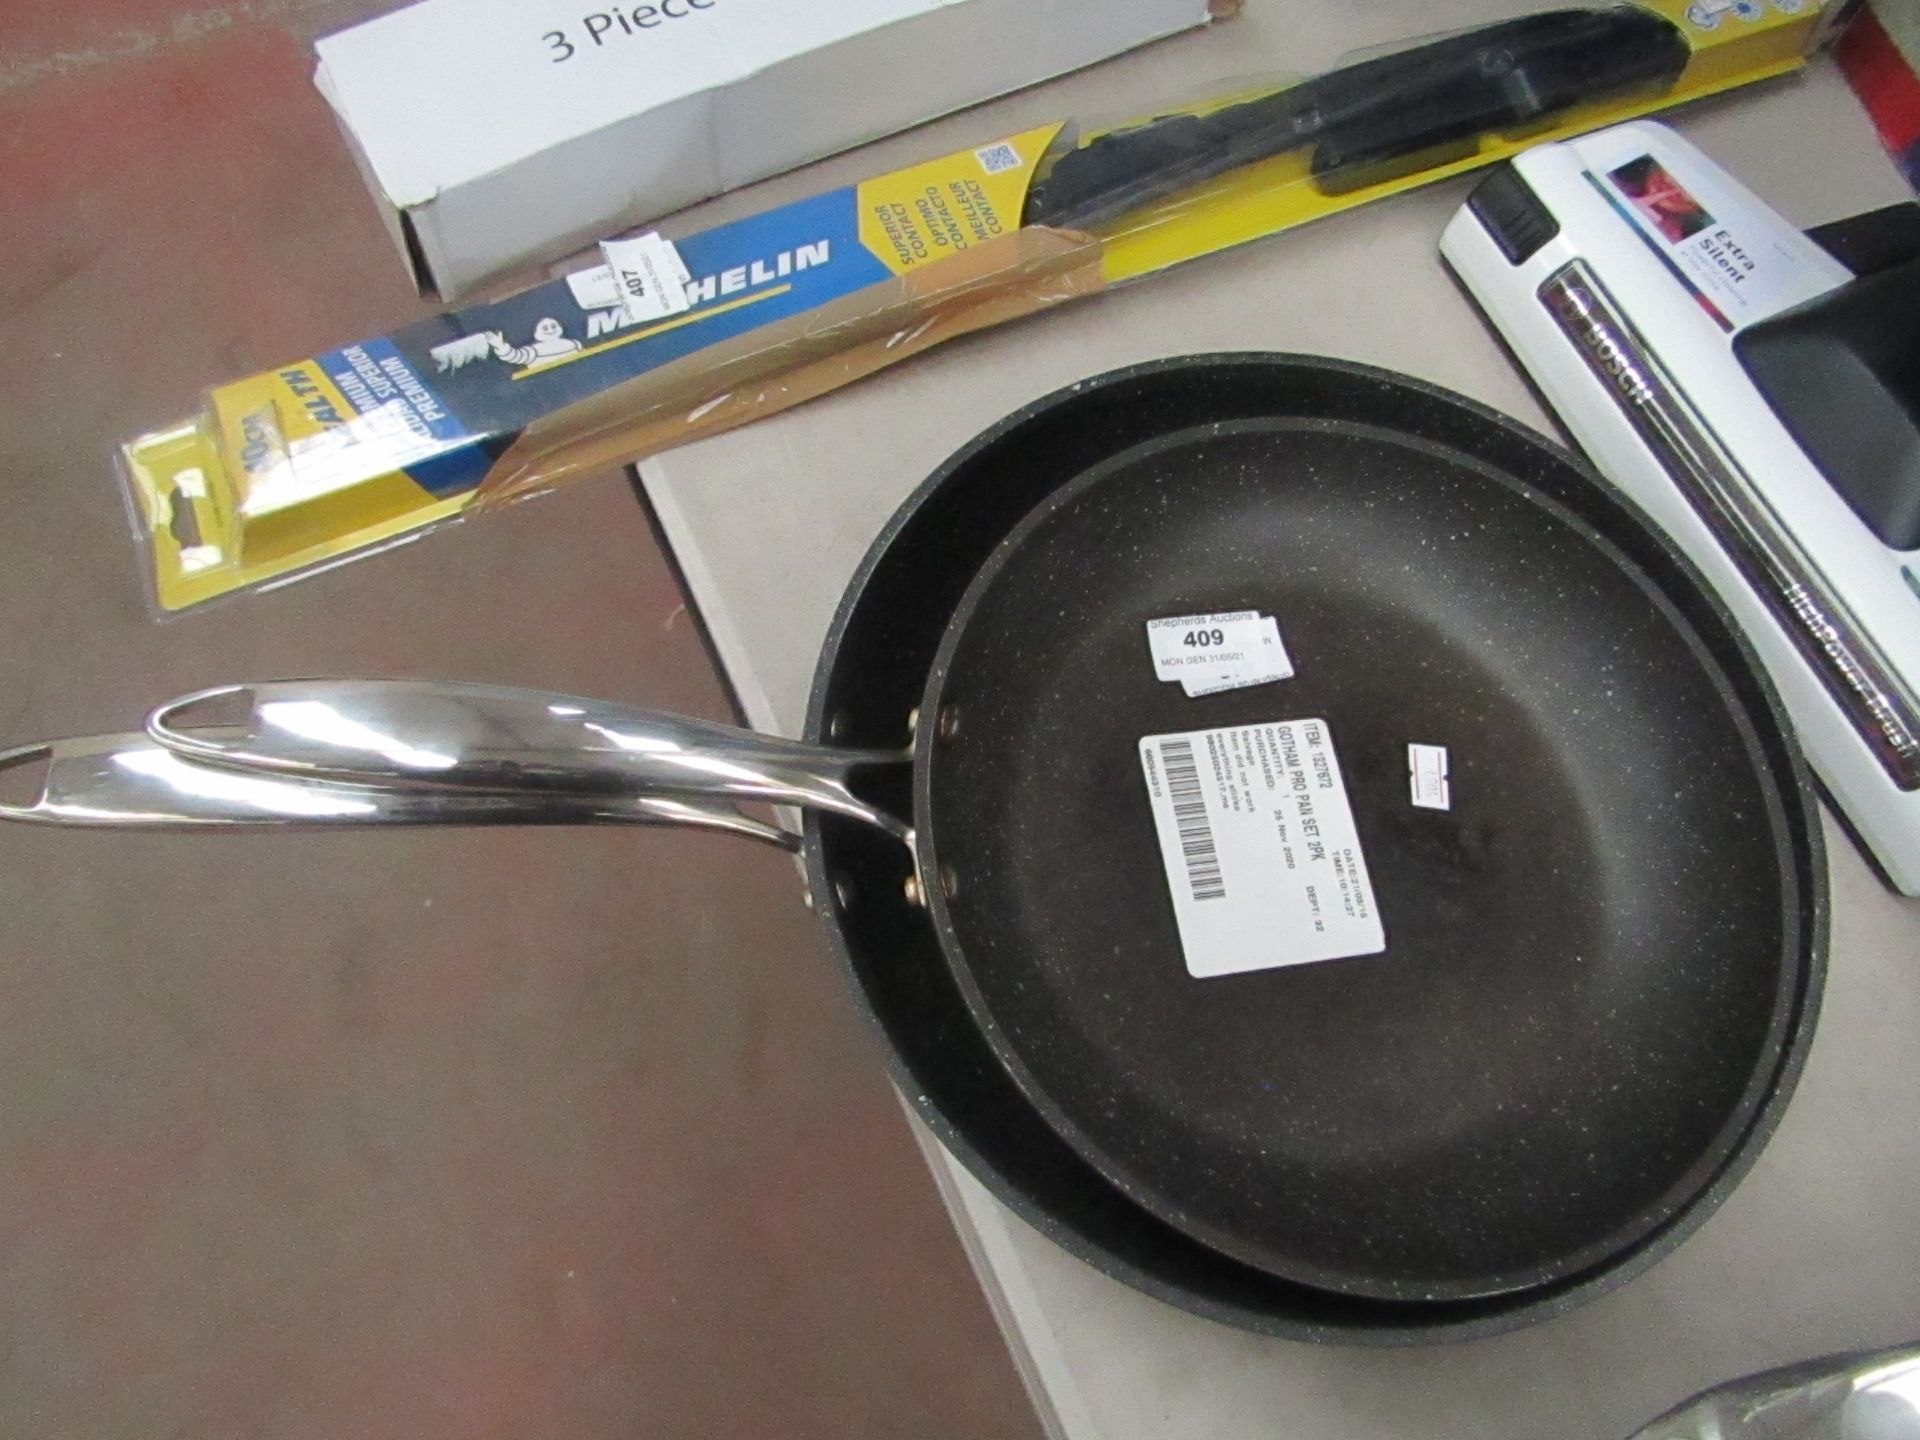 Gotham - 2 Piece Pro Frying Pan Set - Used Condition.